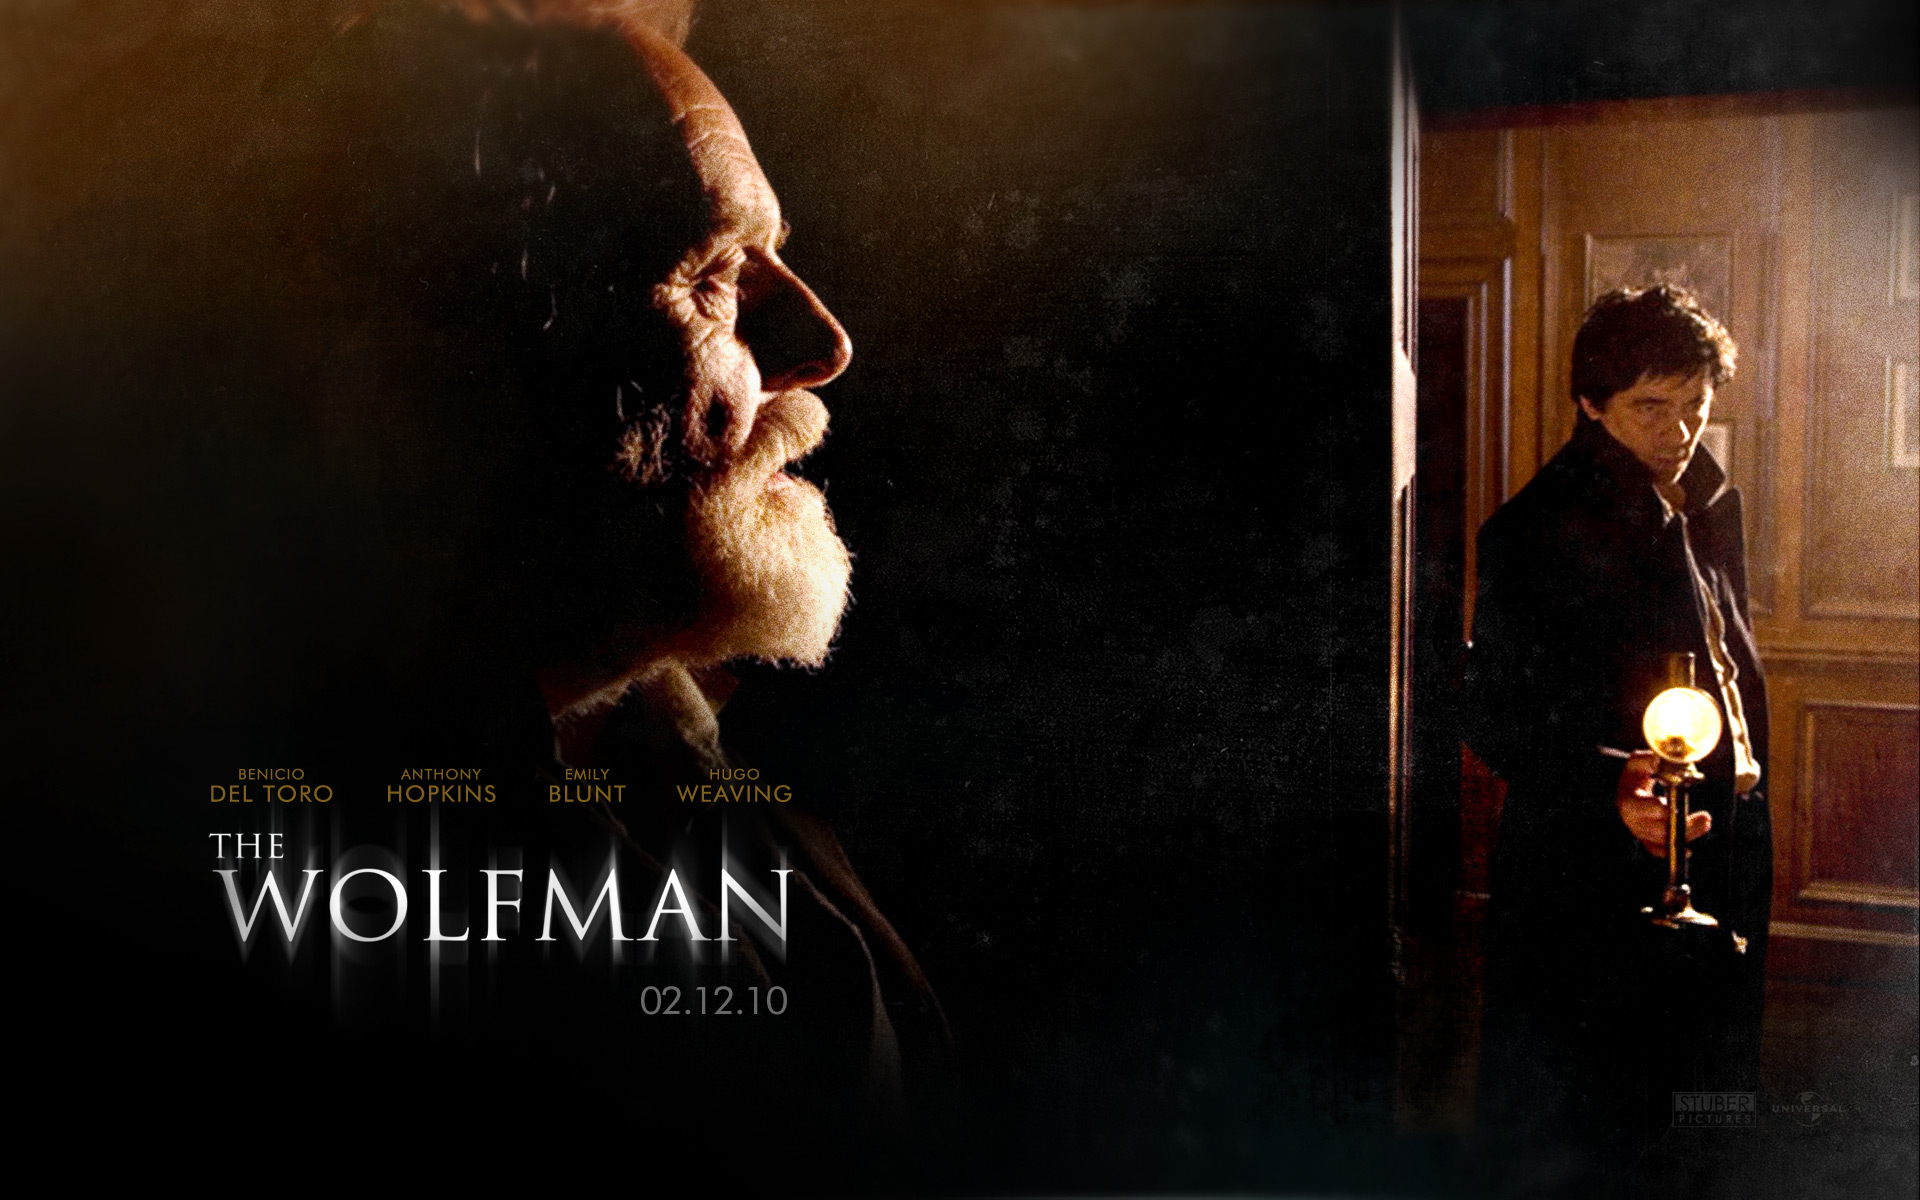 Anthony Hopkins in The Wolfman Wallpapers - HD Wallpapers 76341